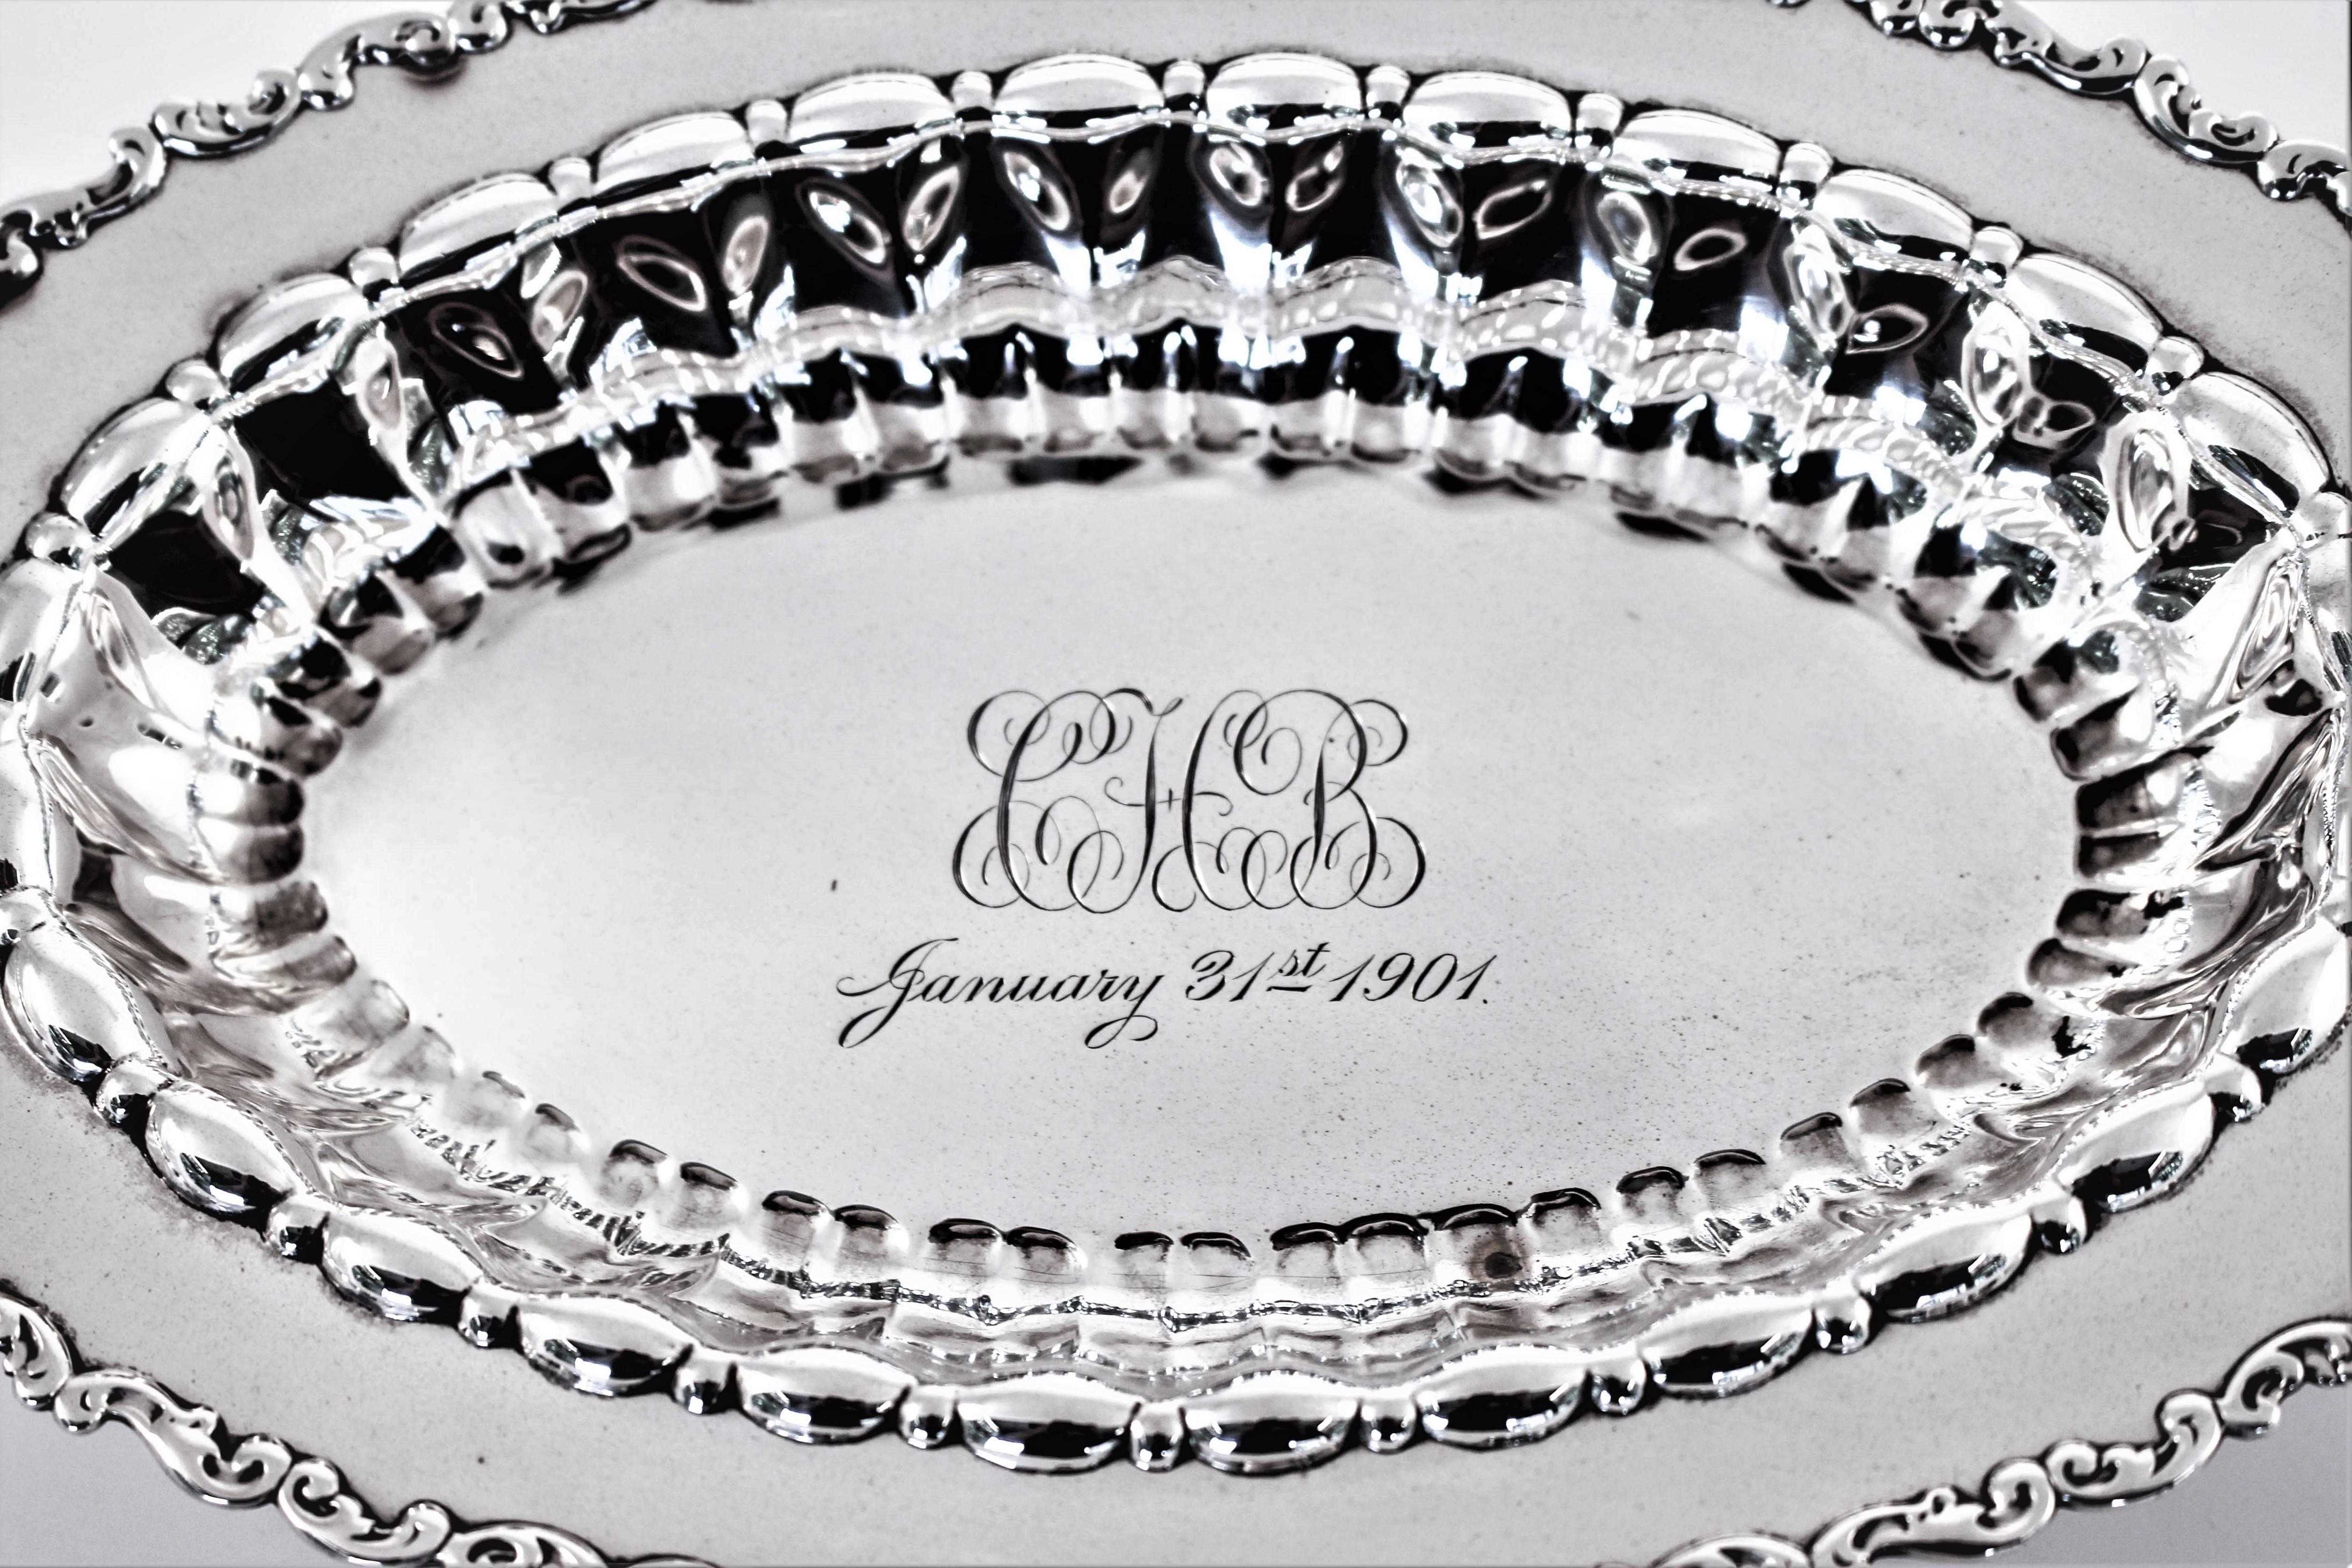 If you’re like me, you love monograms and dates on your silver. This piece has a hand engraved monogram (CHB) in the centre and the date it was given, January 31, 1901. A little over one hundred and 17 years ago. It’s a conversation piece on its